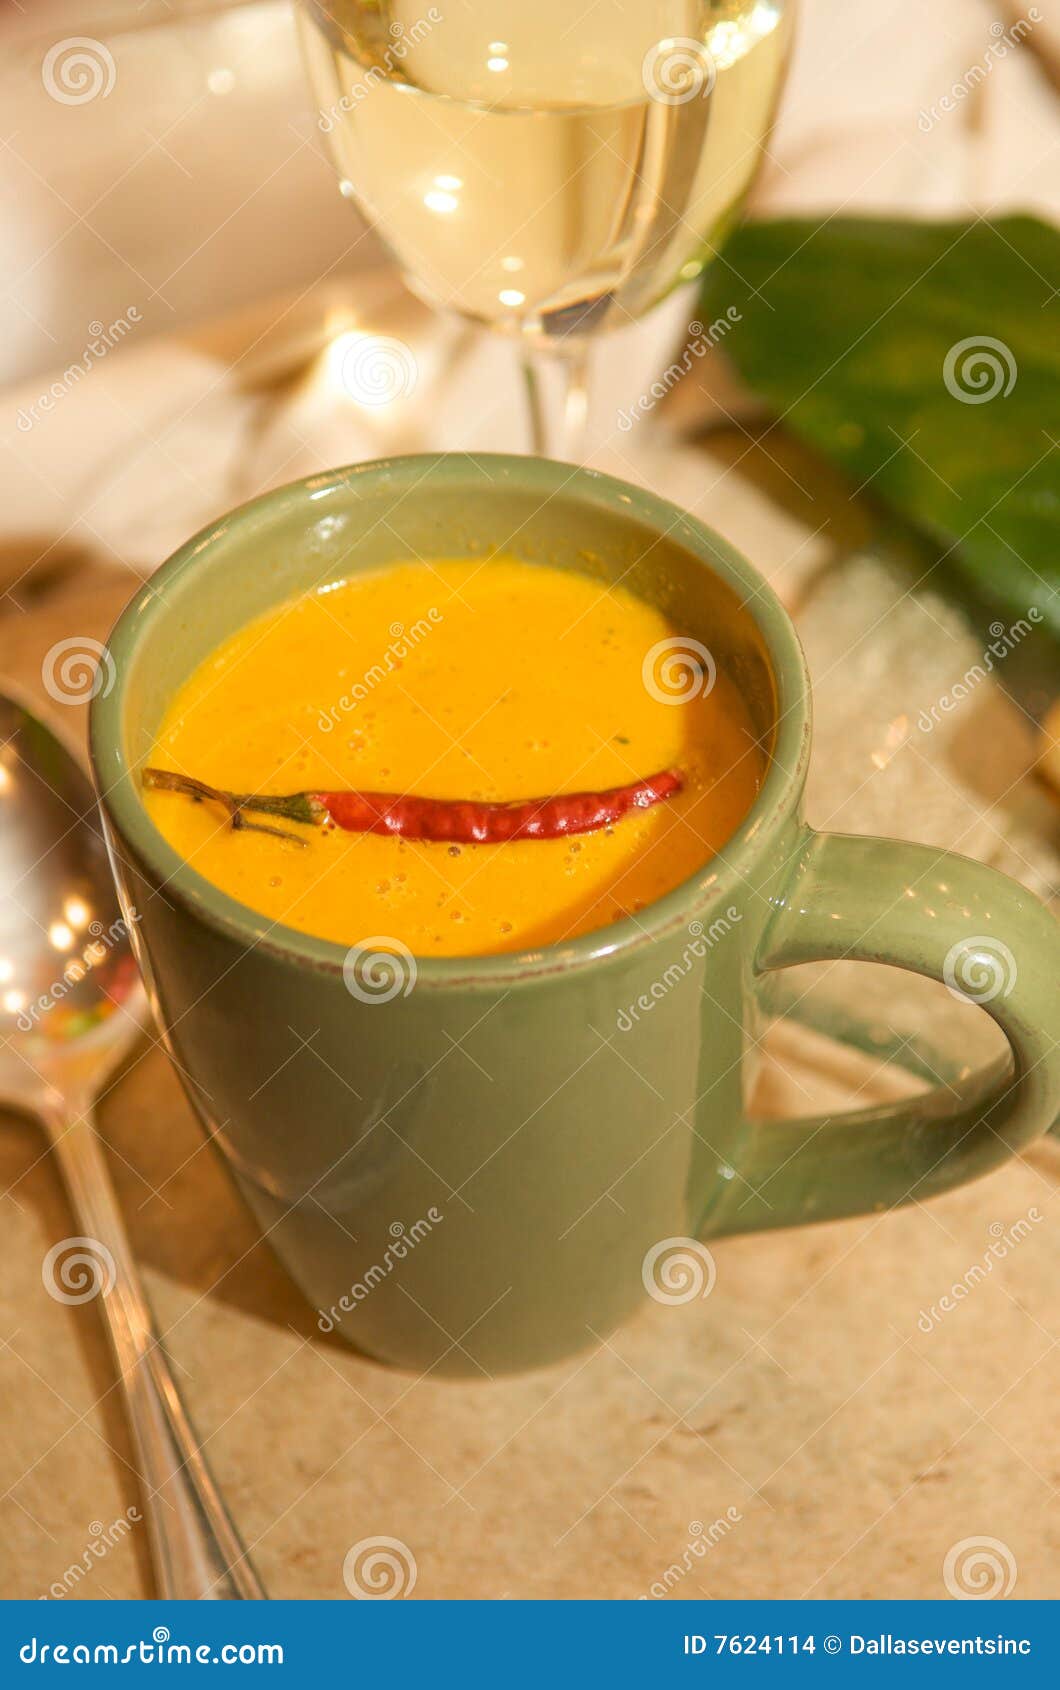 cup of cheese queso with a chili garnish